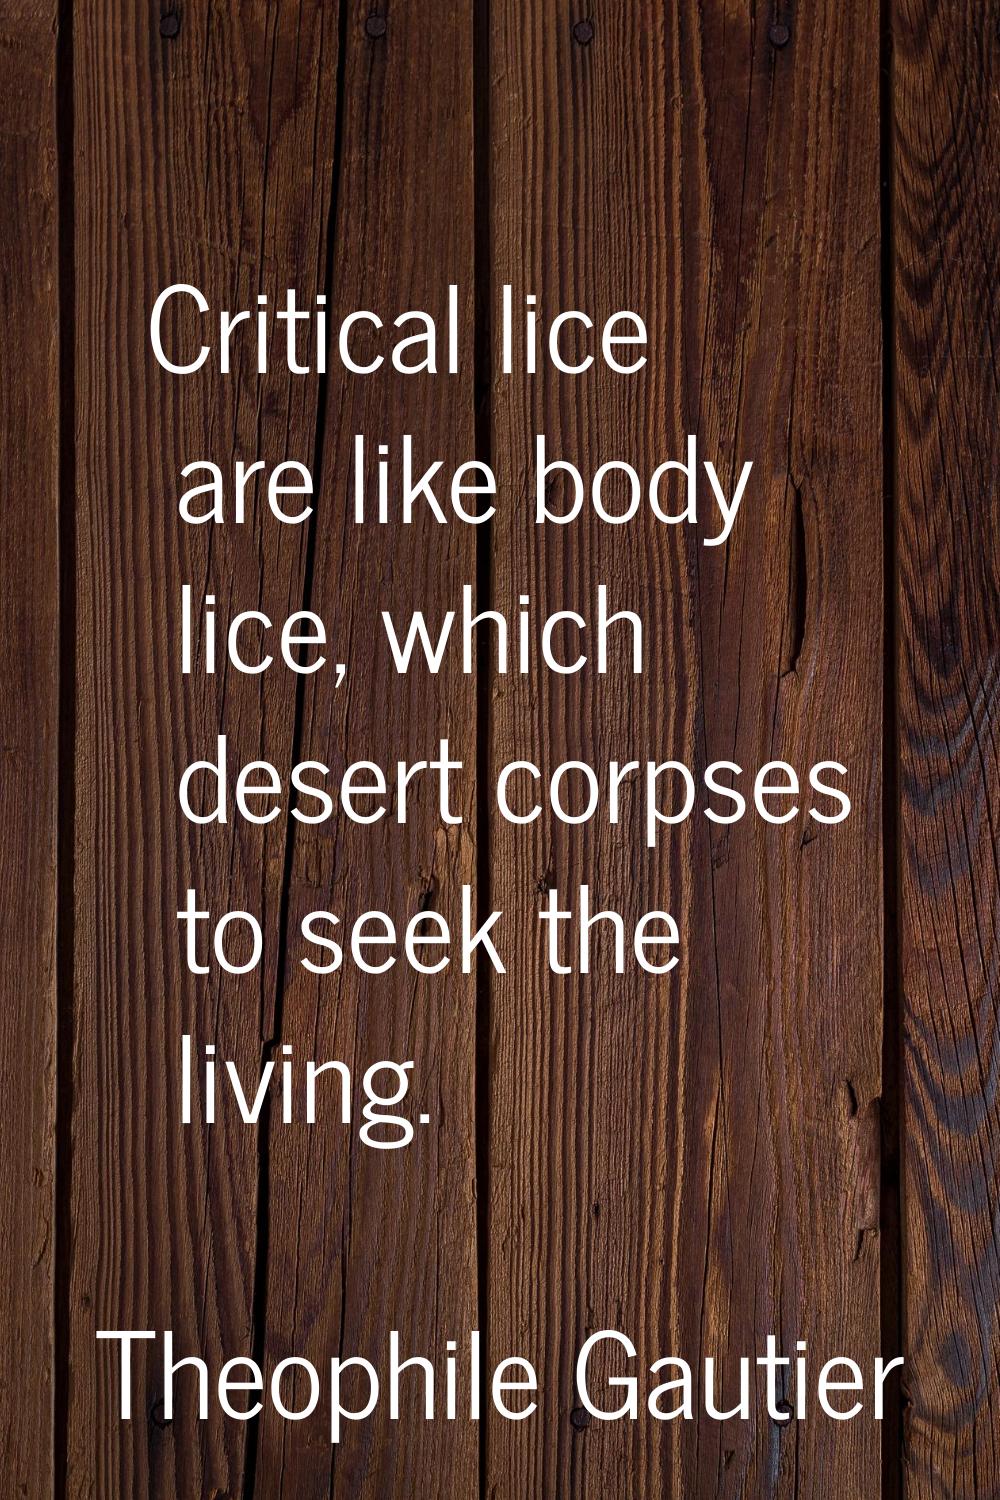 Critical lice are like body lice, which desert corpses to seek the living.